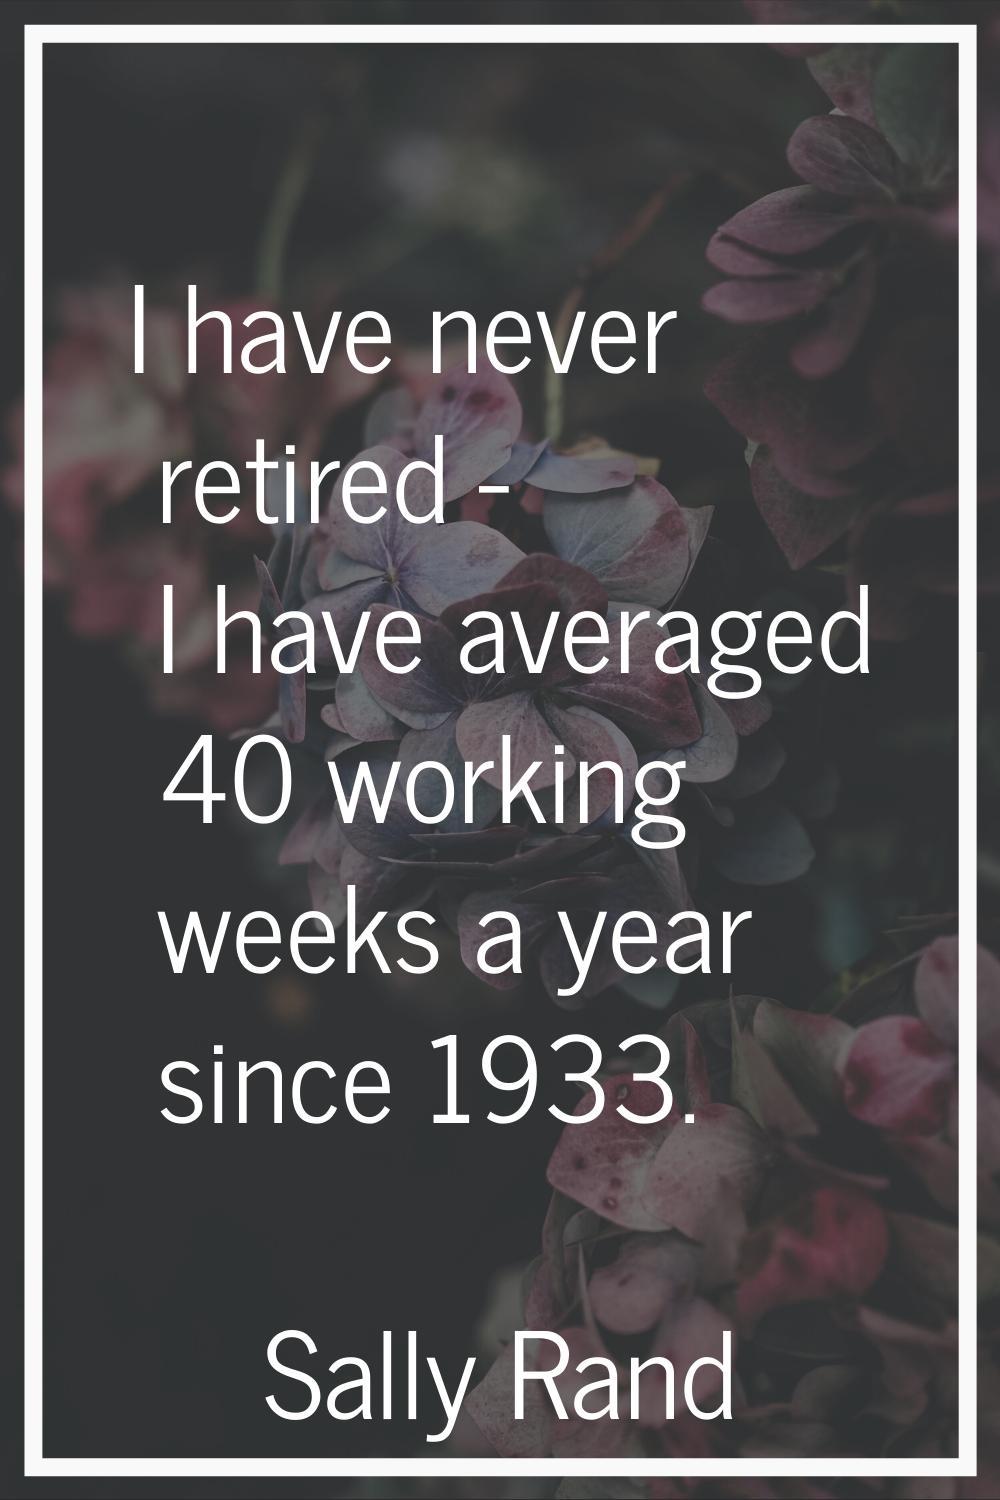 I have never retired - I have averaged 40 working weeks a year since 1933.